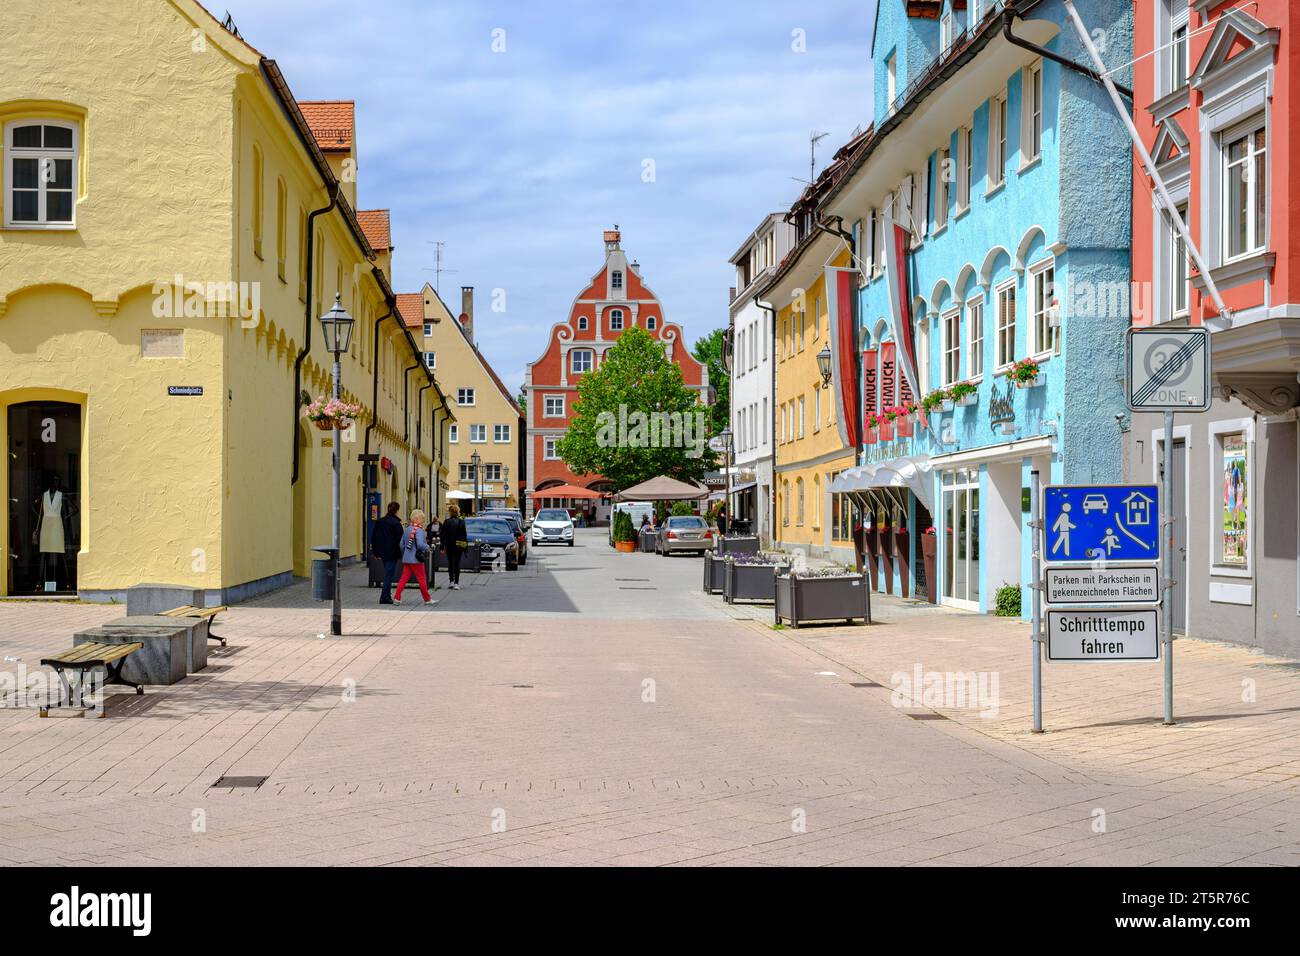 Lively everyday scene in front of a historic architectural backdrop in the Old Town of Memmingen, Swabia, Bavaria, Germany. Stock Photo